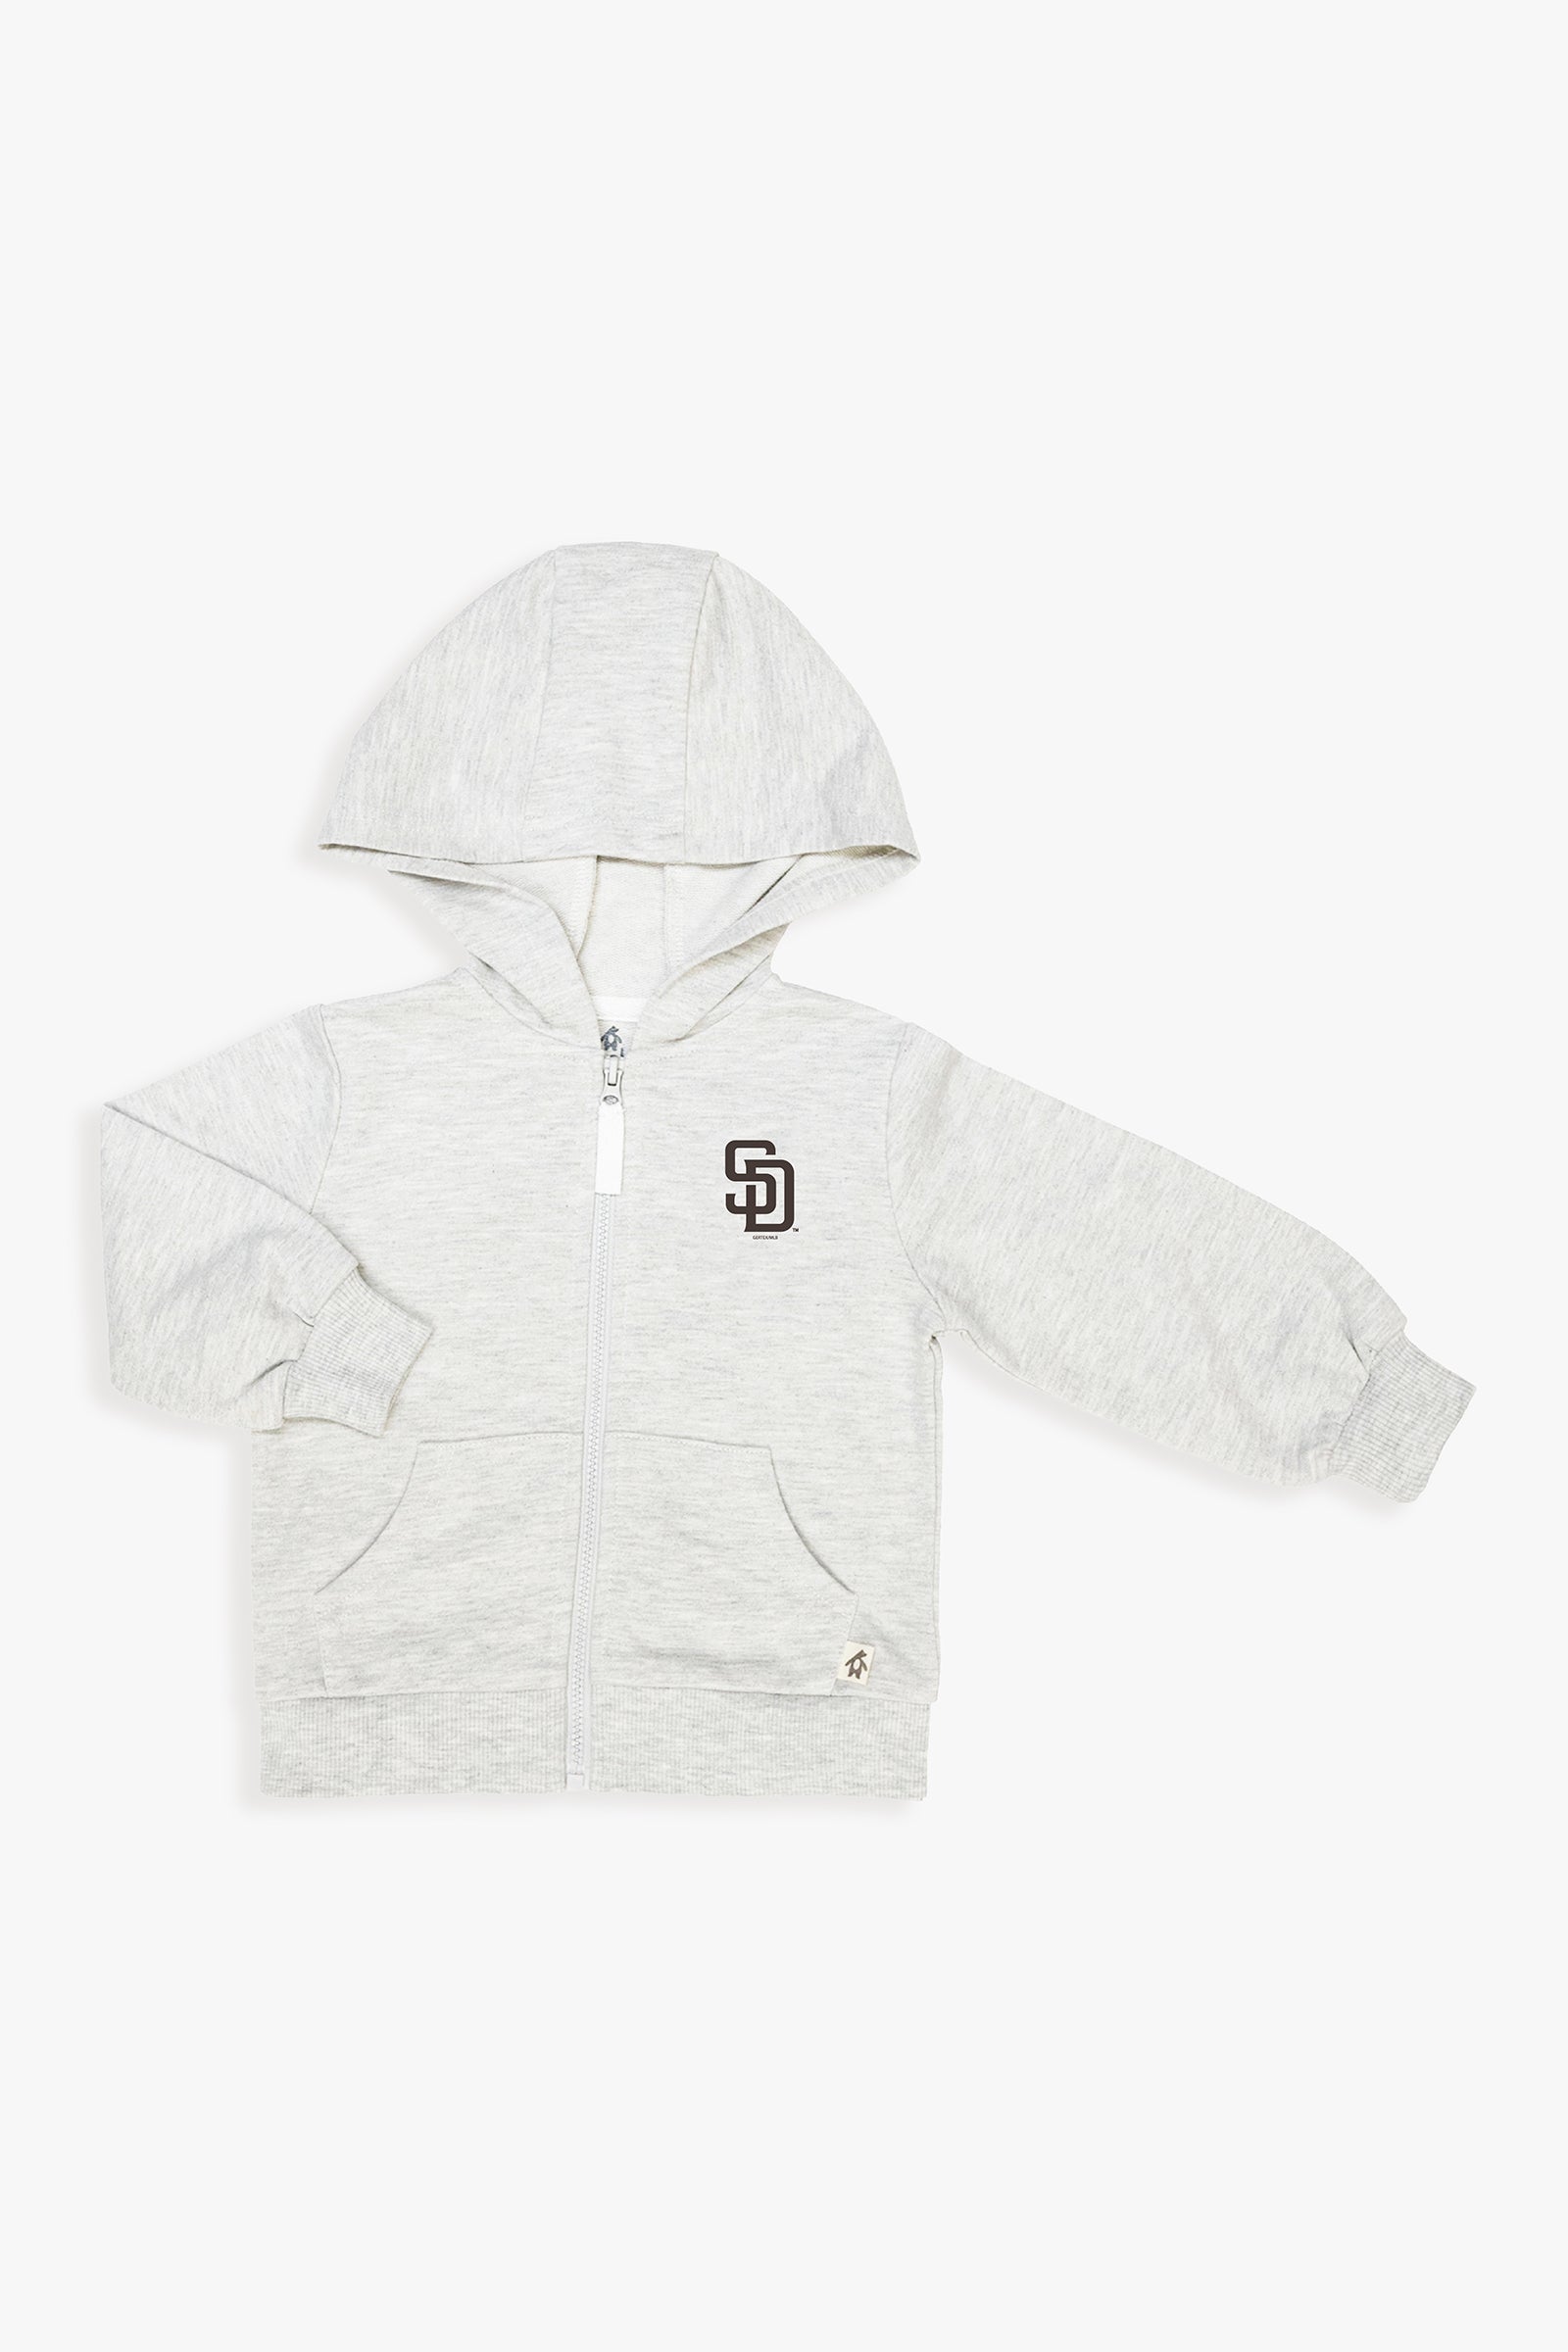 Gertex MLB Unisex Baby French Terry Cotton Zip-Up Hoodie